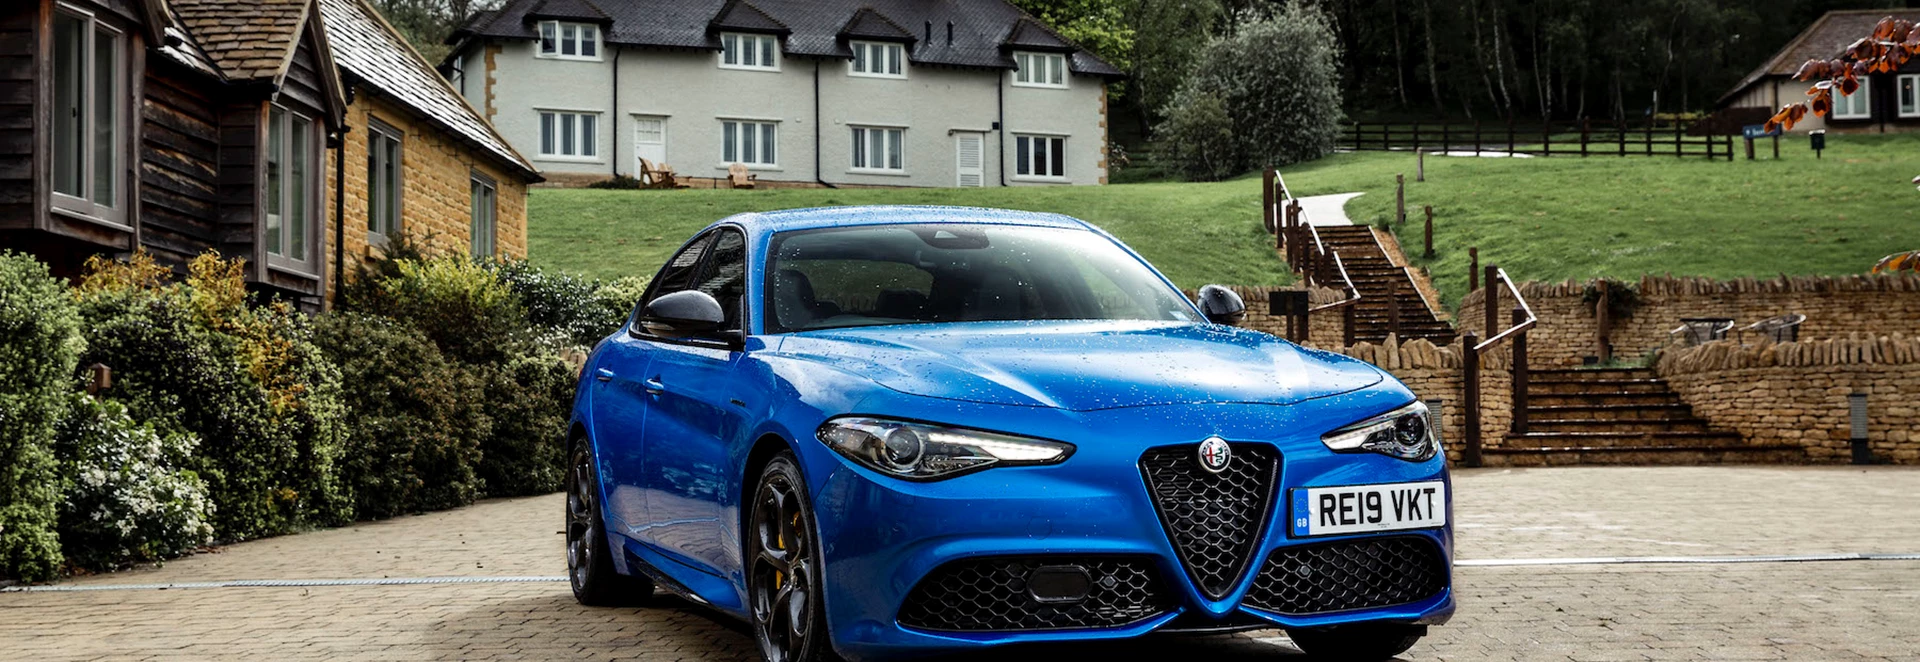 How you can save up to £6,000 off a new Alfa Romeo Giulia